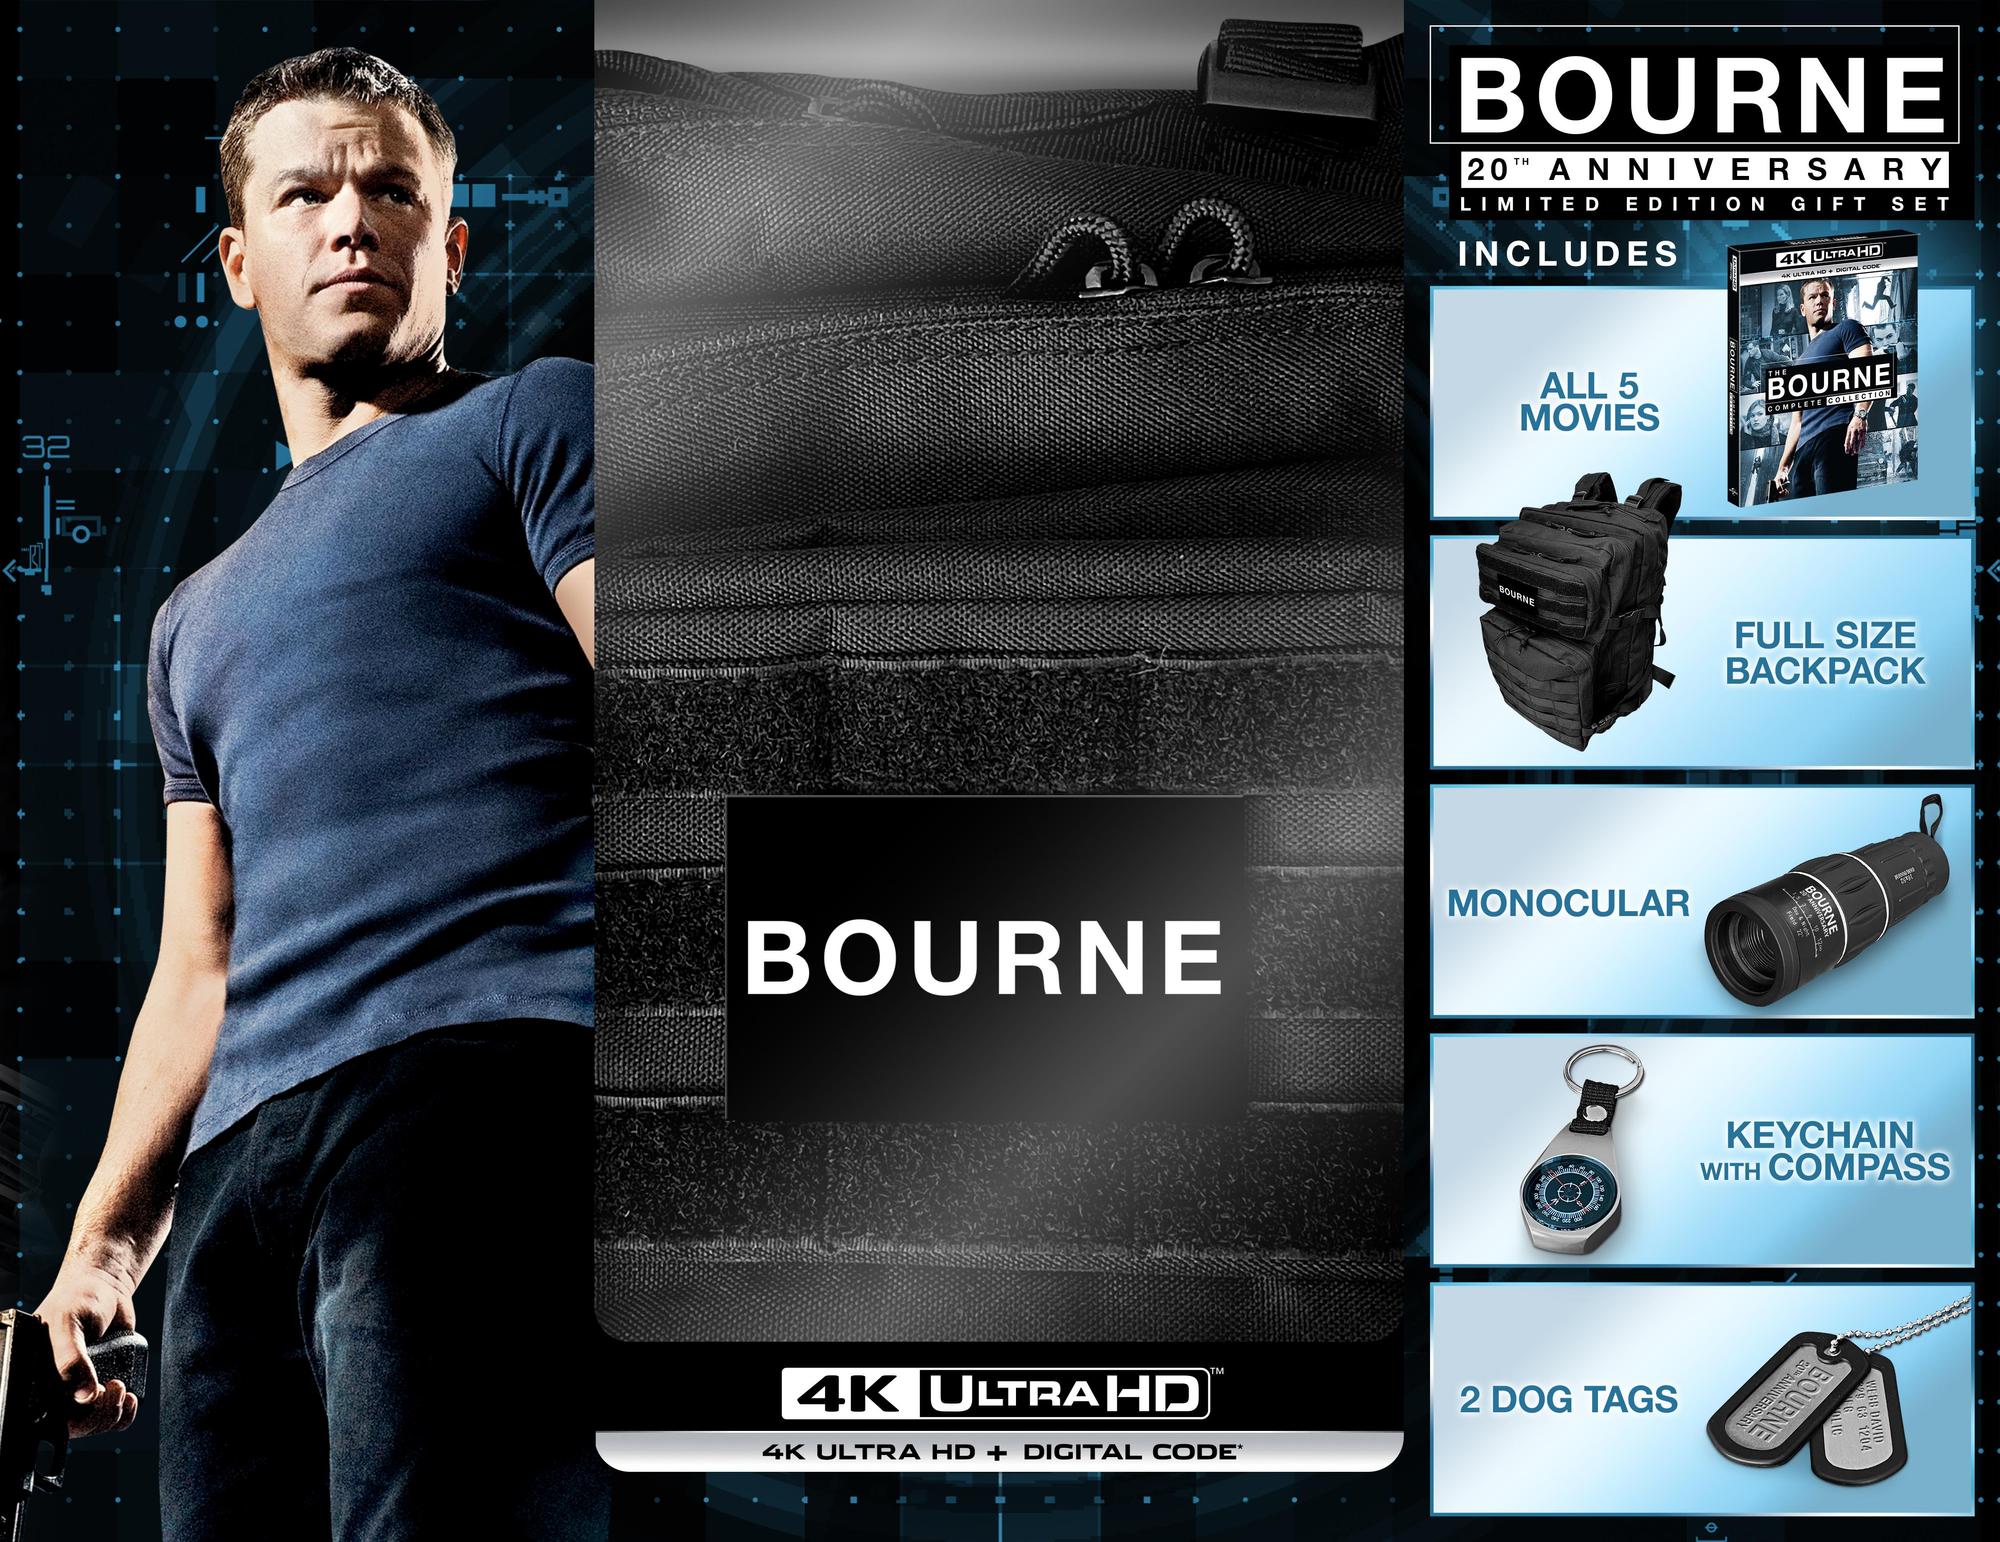 The Bourne Complete Collection - 20th Anniversary Limited Edition Gift Set (4K Ultra HD) - UHD   - Thriller Movies On 4K Ultra HD Blu-ray - Movies On